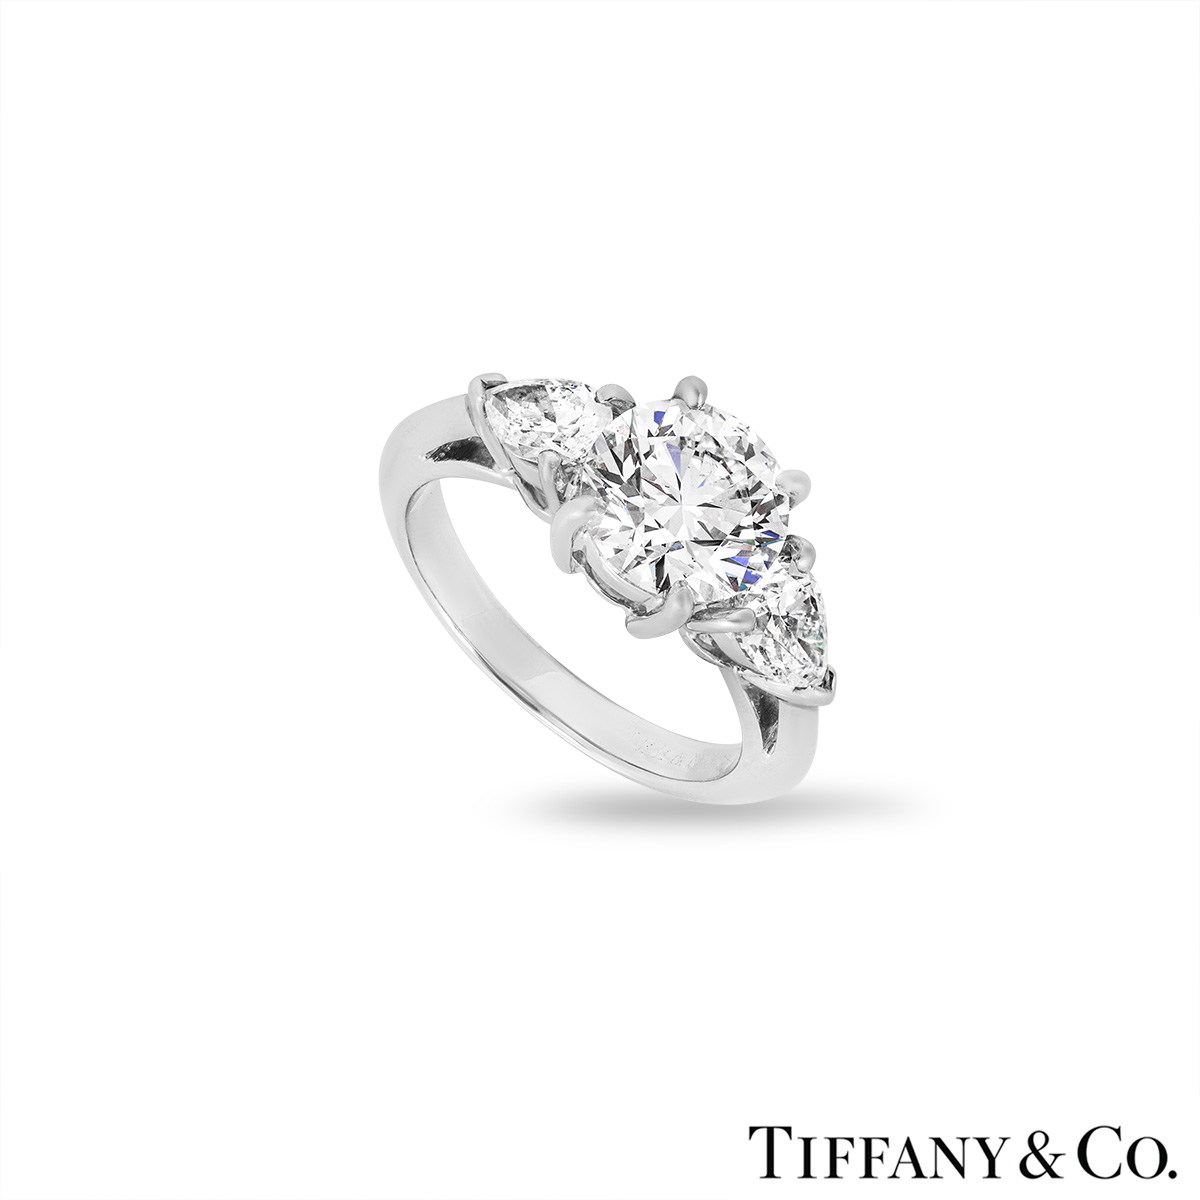 Used Engagement Ring Price Calculator | Have You Seen the Ring